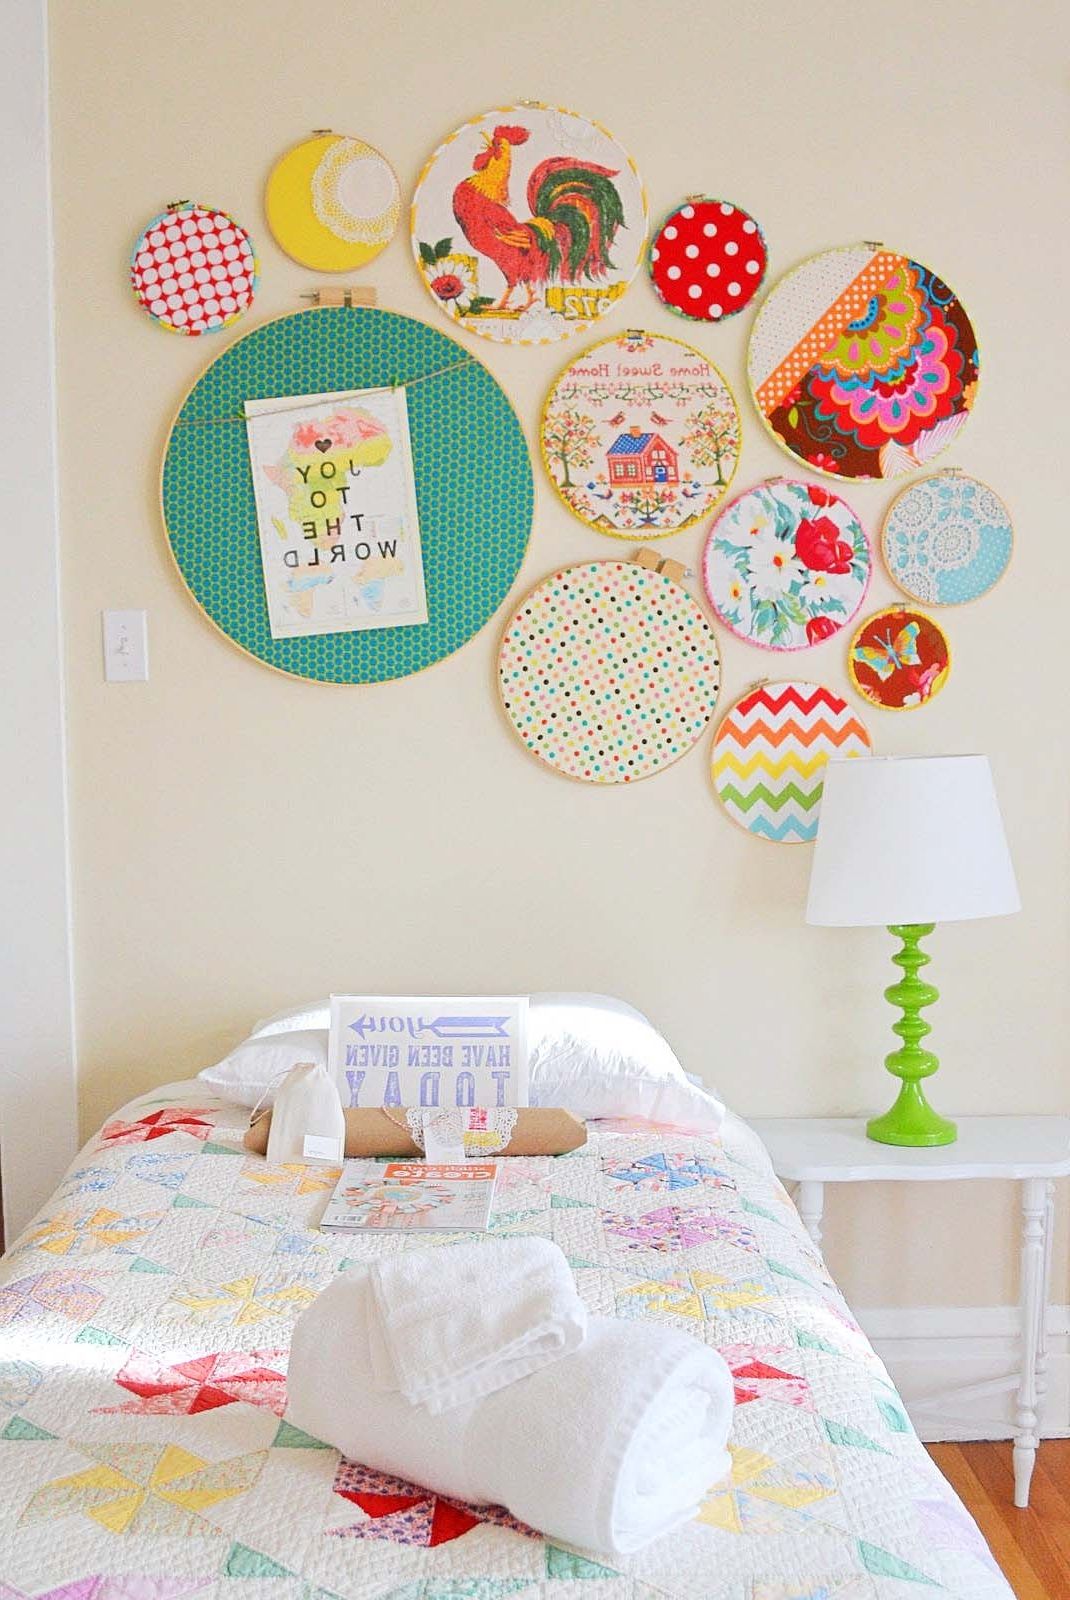 Well Known What's All The Hoopla About? – Project Nursery Within Embroidery Hoop Fabric Wall Art (View 4 of 15)